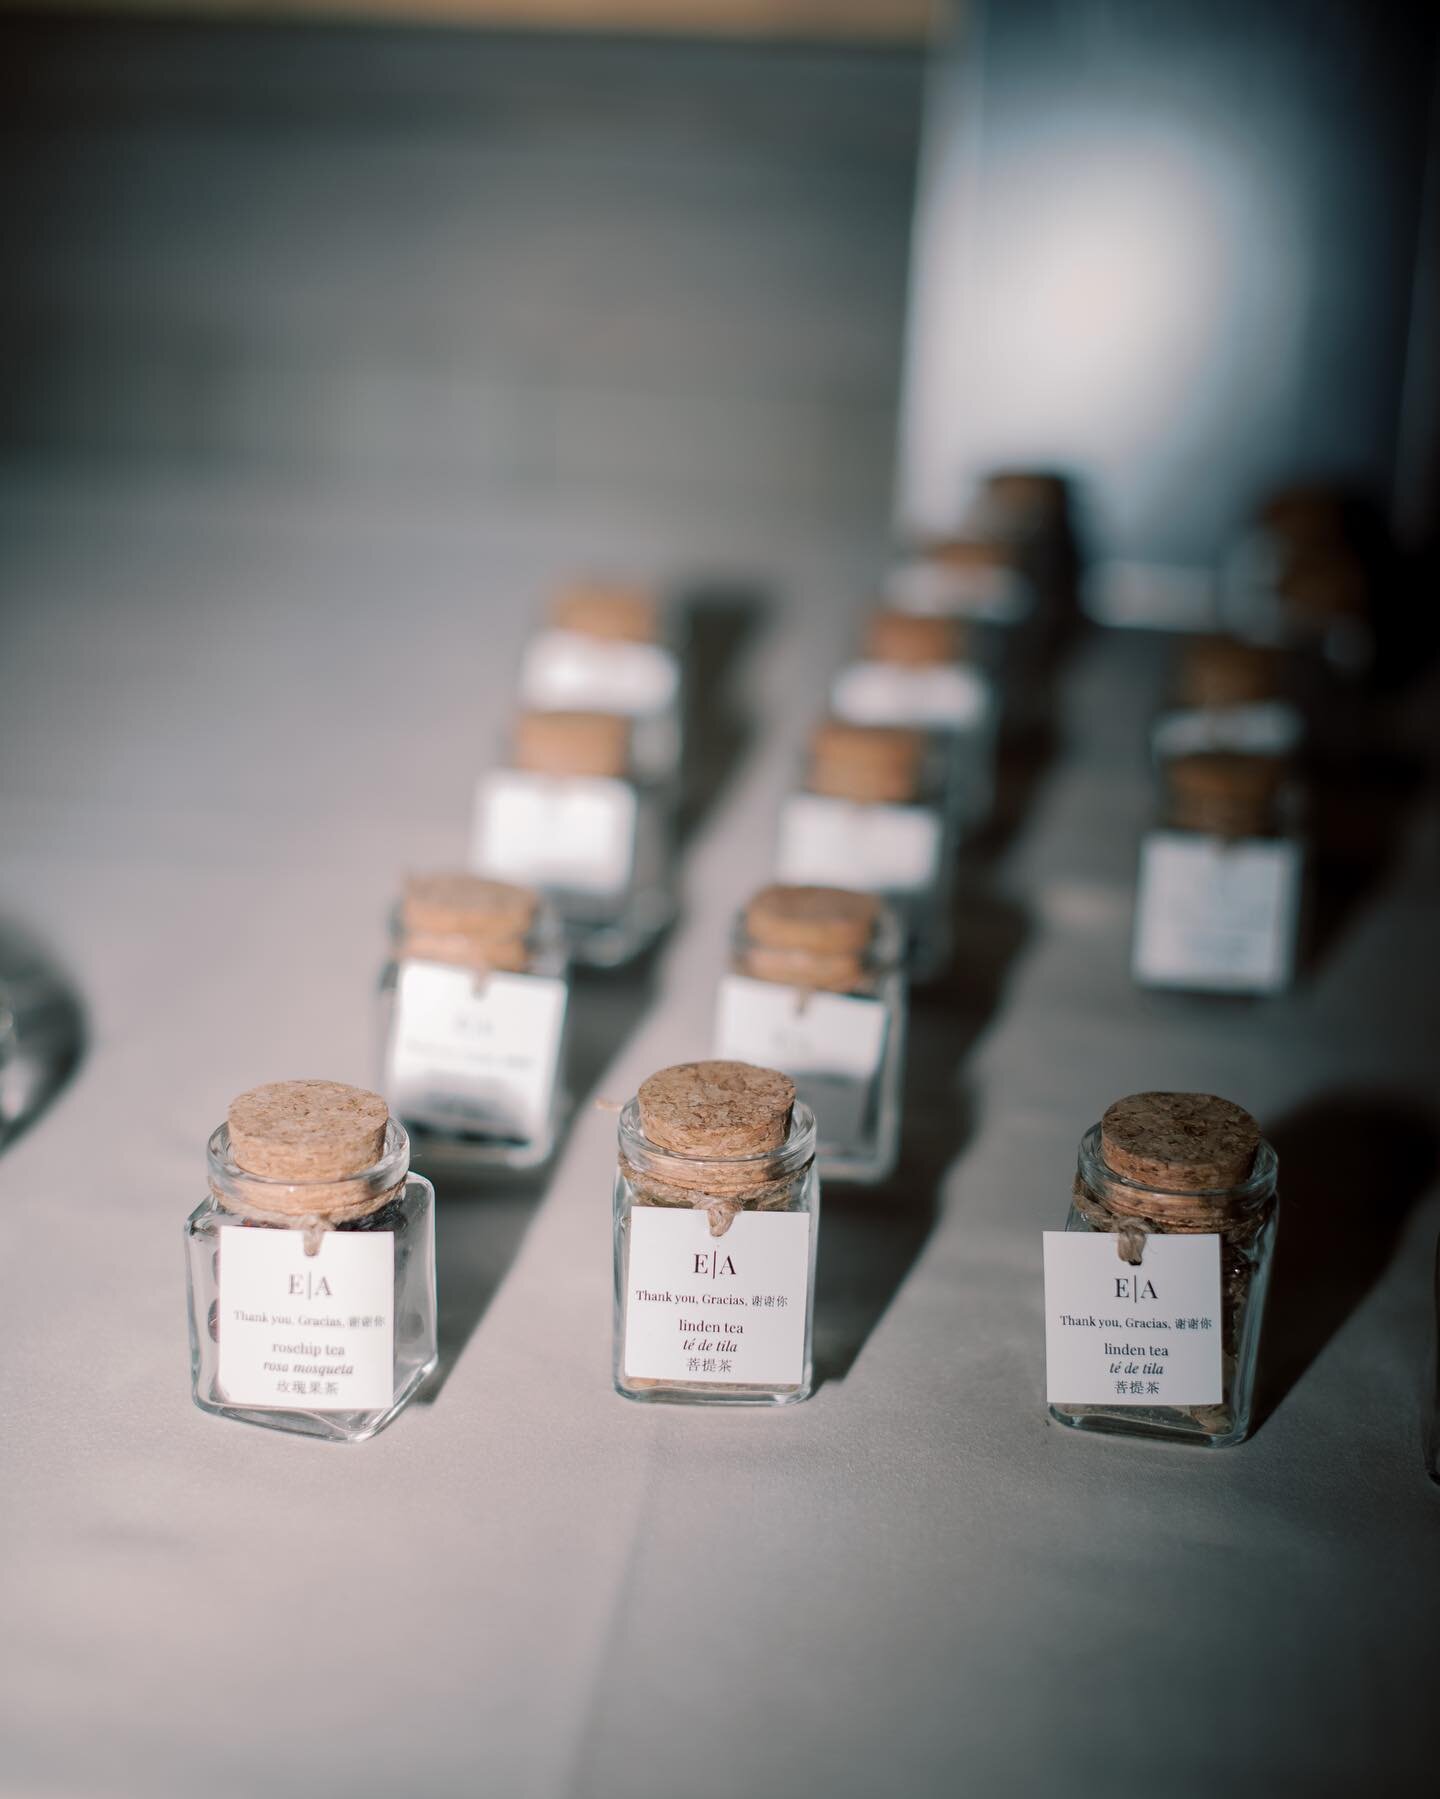 I&rsquo;m loving all the sweet, personalized touches I&rsquo;ve been seeing with recent weddings!! These little jars were especially cute (can&rsquo;t remember what was in them, though lol 😂)
.
.
.
.
.
#vacavilleweddingphotographer #weddingdetails #